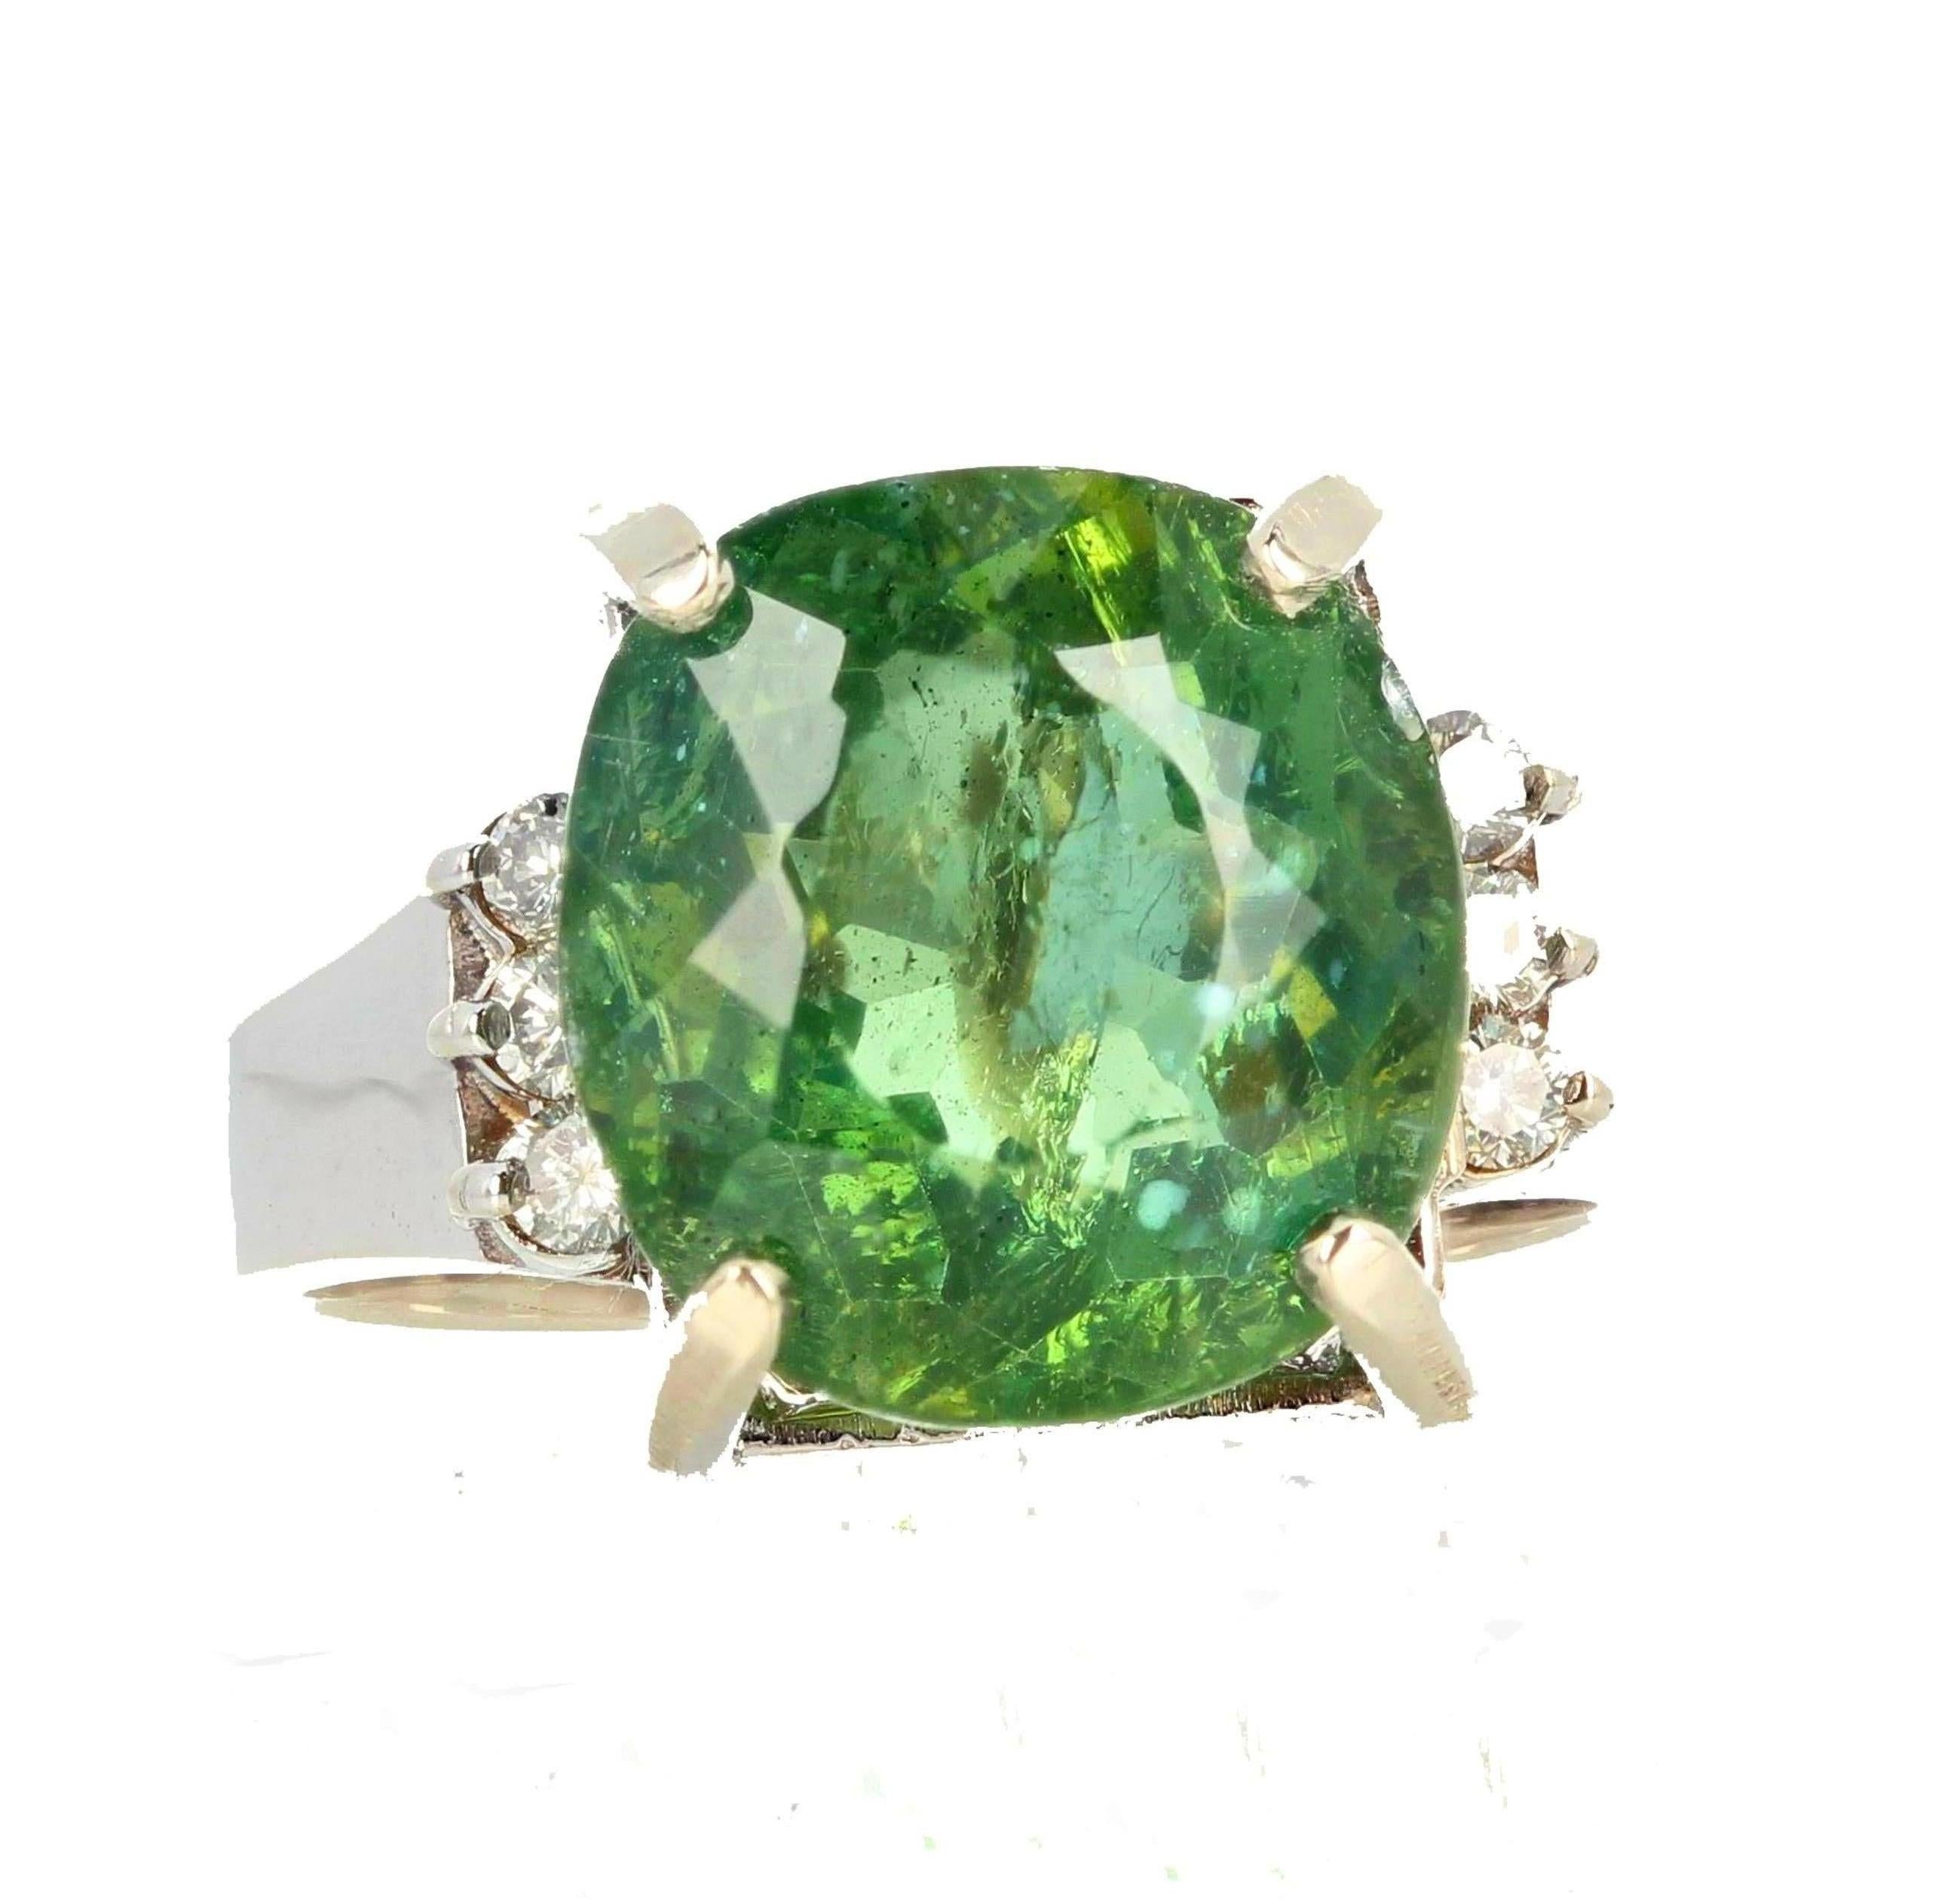 This 8 Carat cushion cut glittering brilliant natural green Madagascar Apatite (12.5mm x 11.9 mm) is enhanced with 6 beautiful sparkling diamonds set in a lovely 14KT white gold ring size 7.3 (sizable). Spectacular optical effect in the Apatite